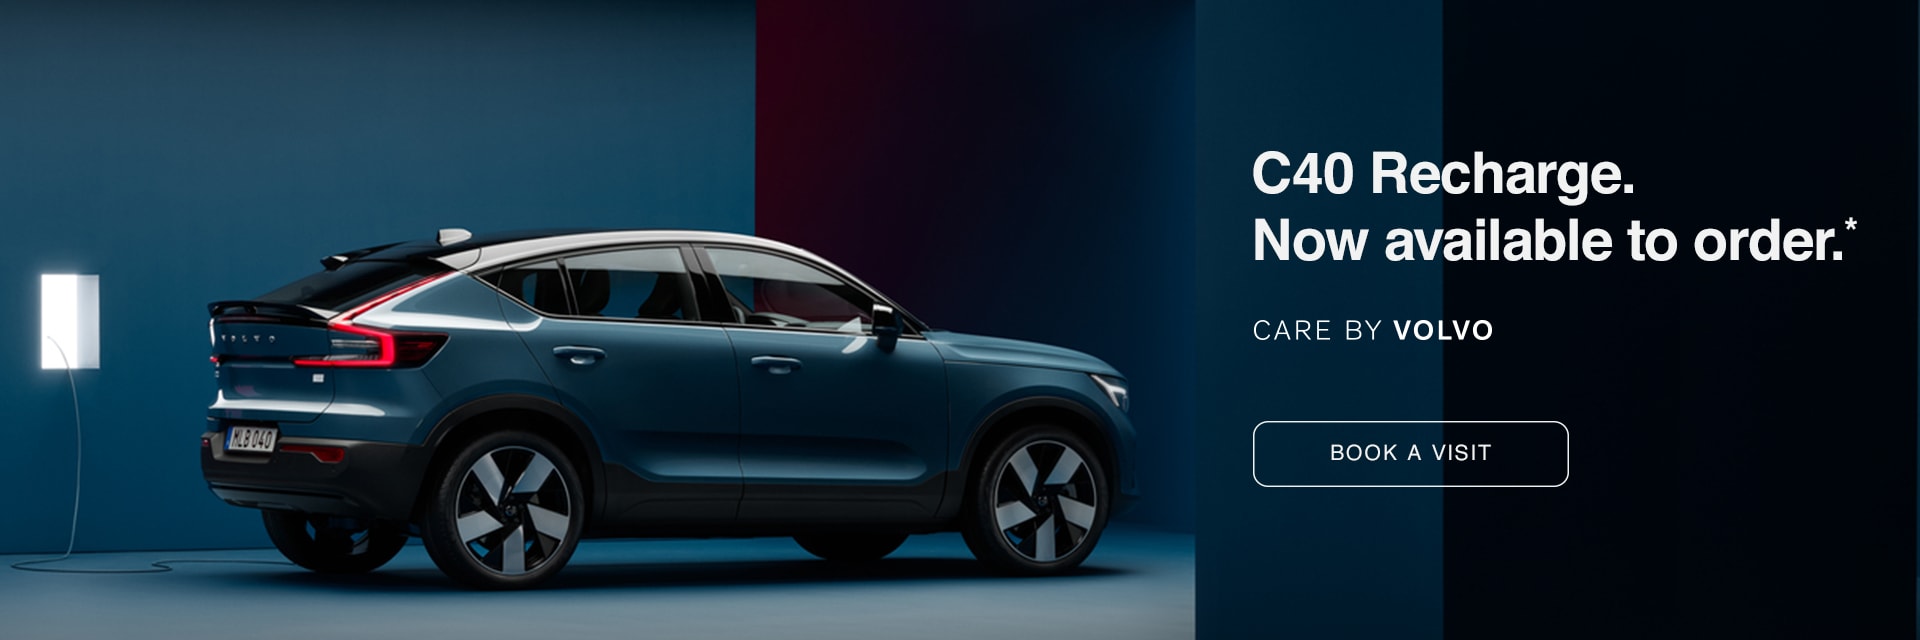 Volvo C40 Electric now available to order